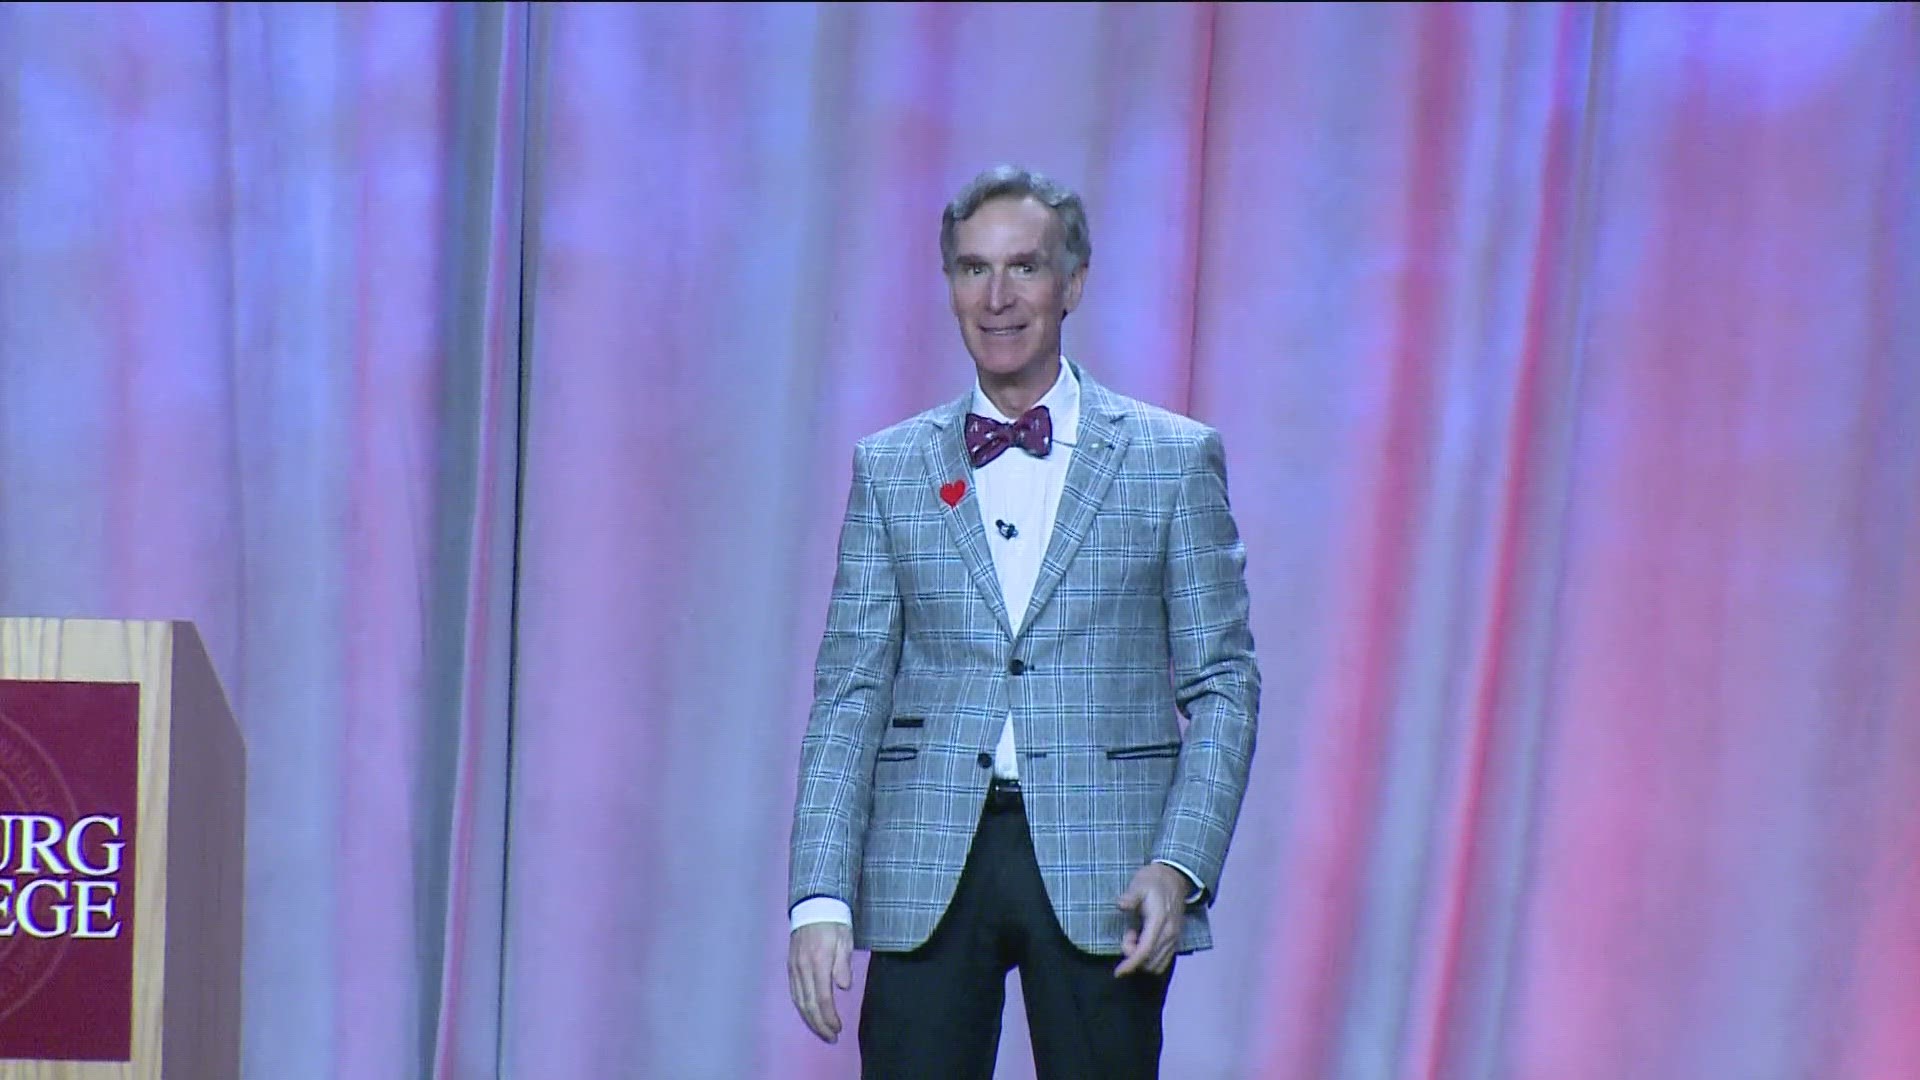 Scientist, comedian, author and inventor Bill Nye is scheduled to share his new live show, "The End is Nye," this fall in Minneapolis.